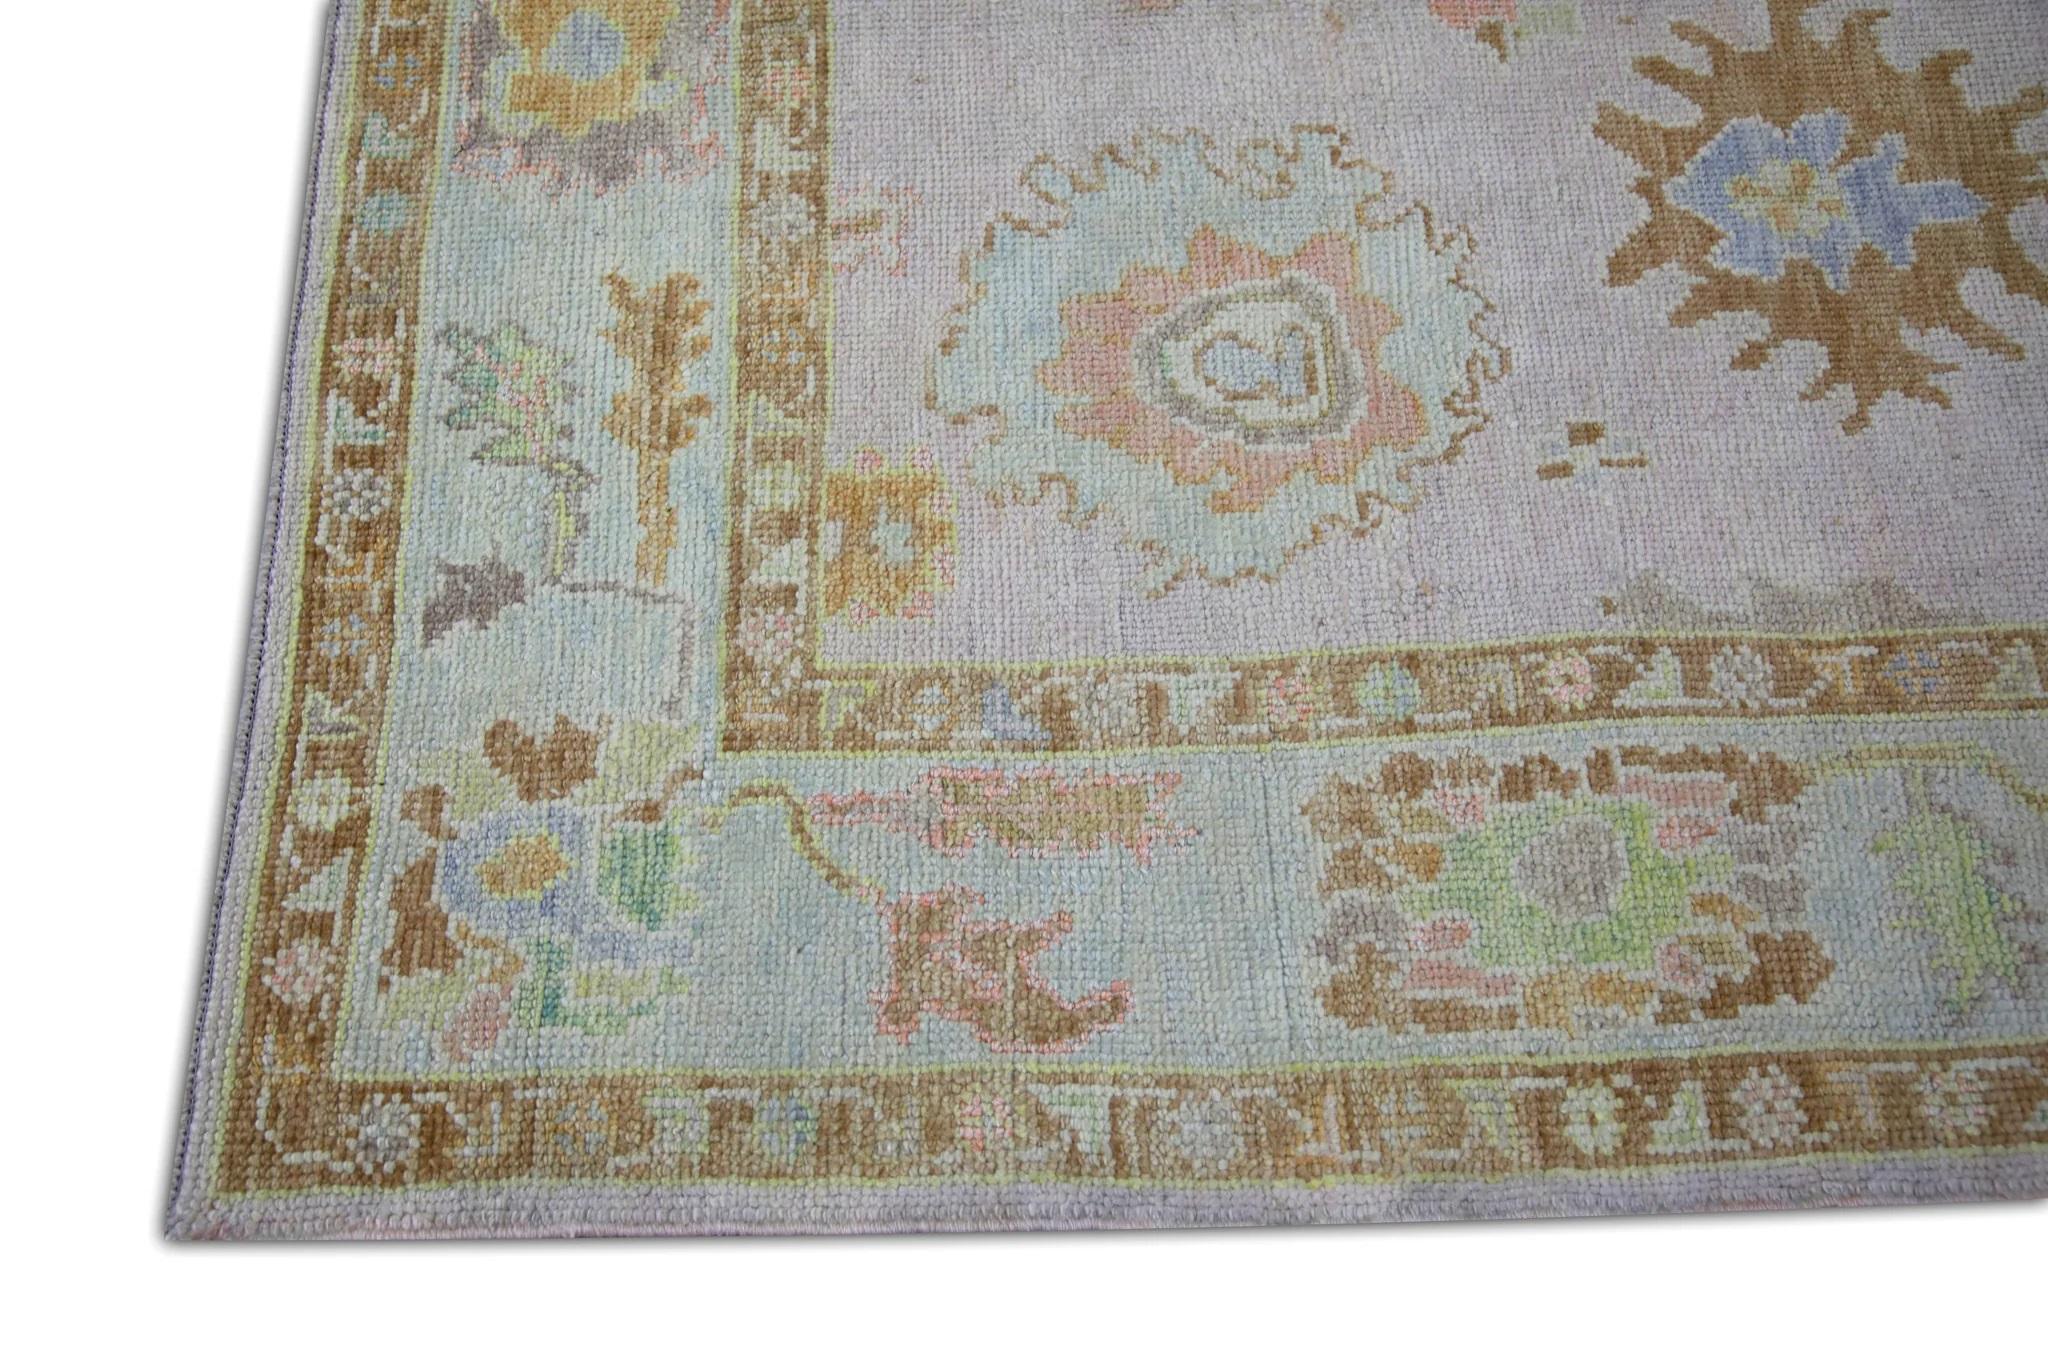 Vegetable Dyed Multicolor Floral Handwoven Wool Turkish Oushak Rug 5' x 6'8